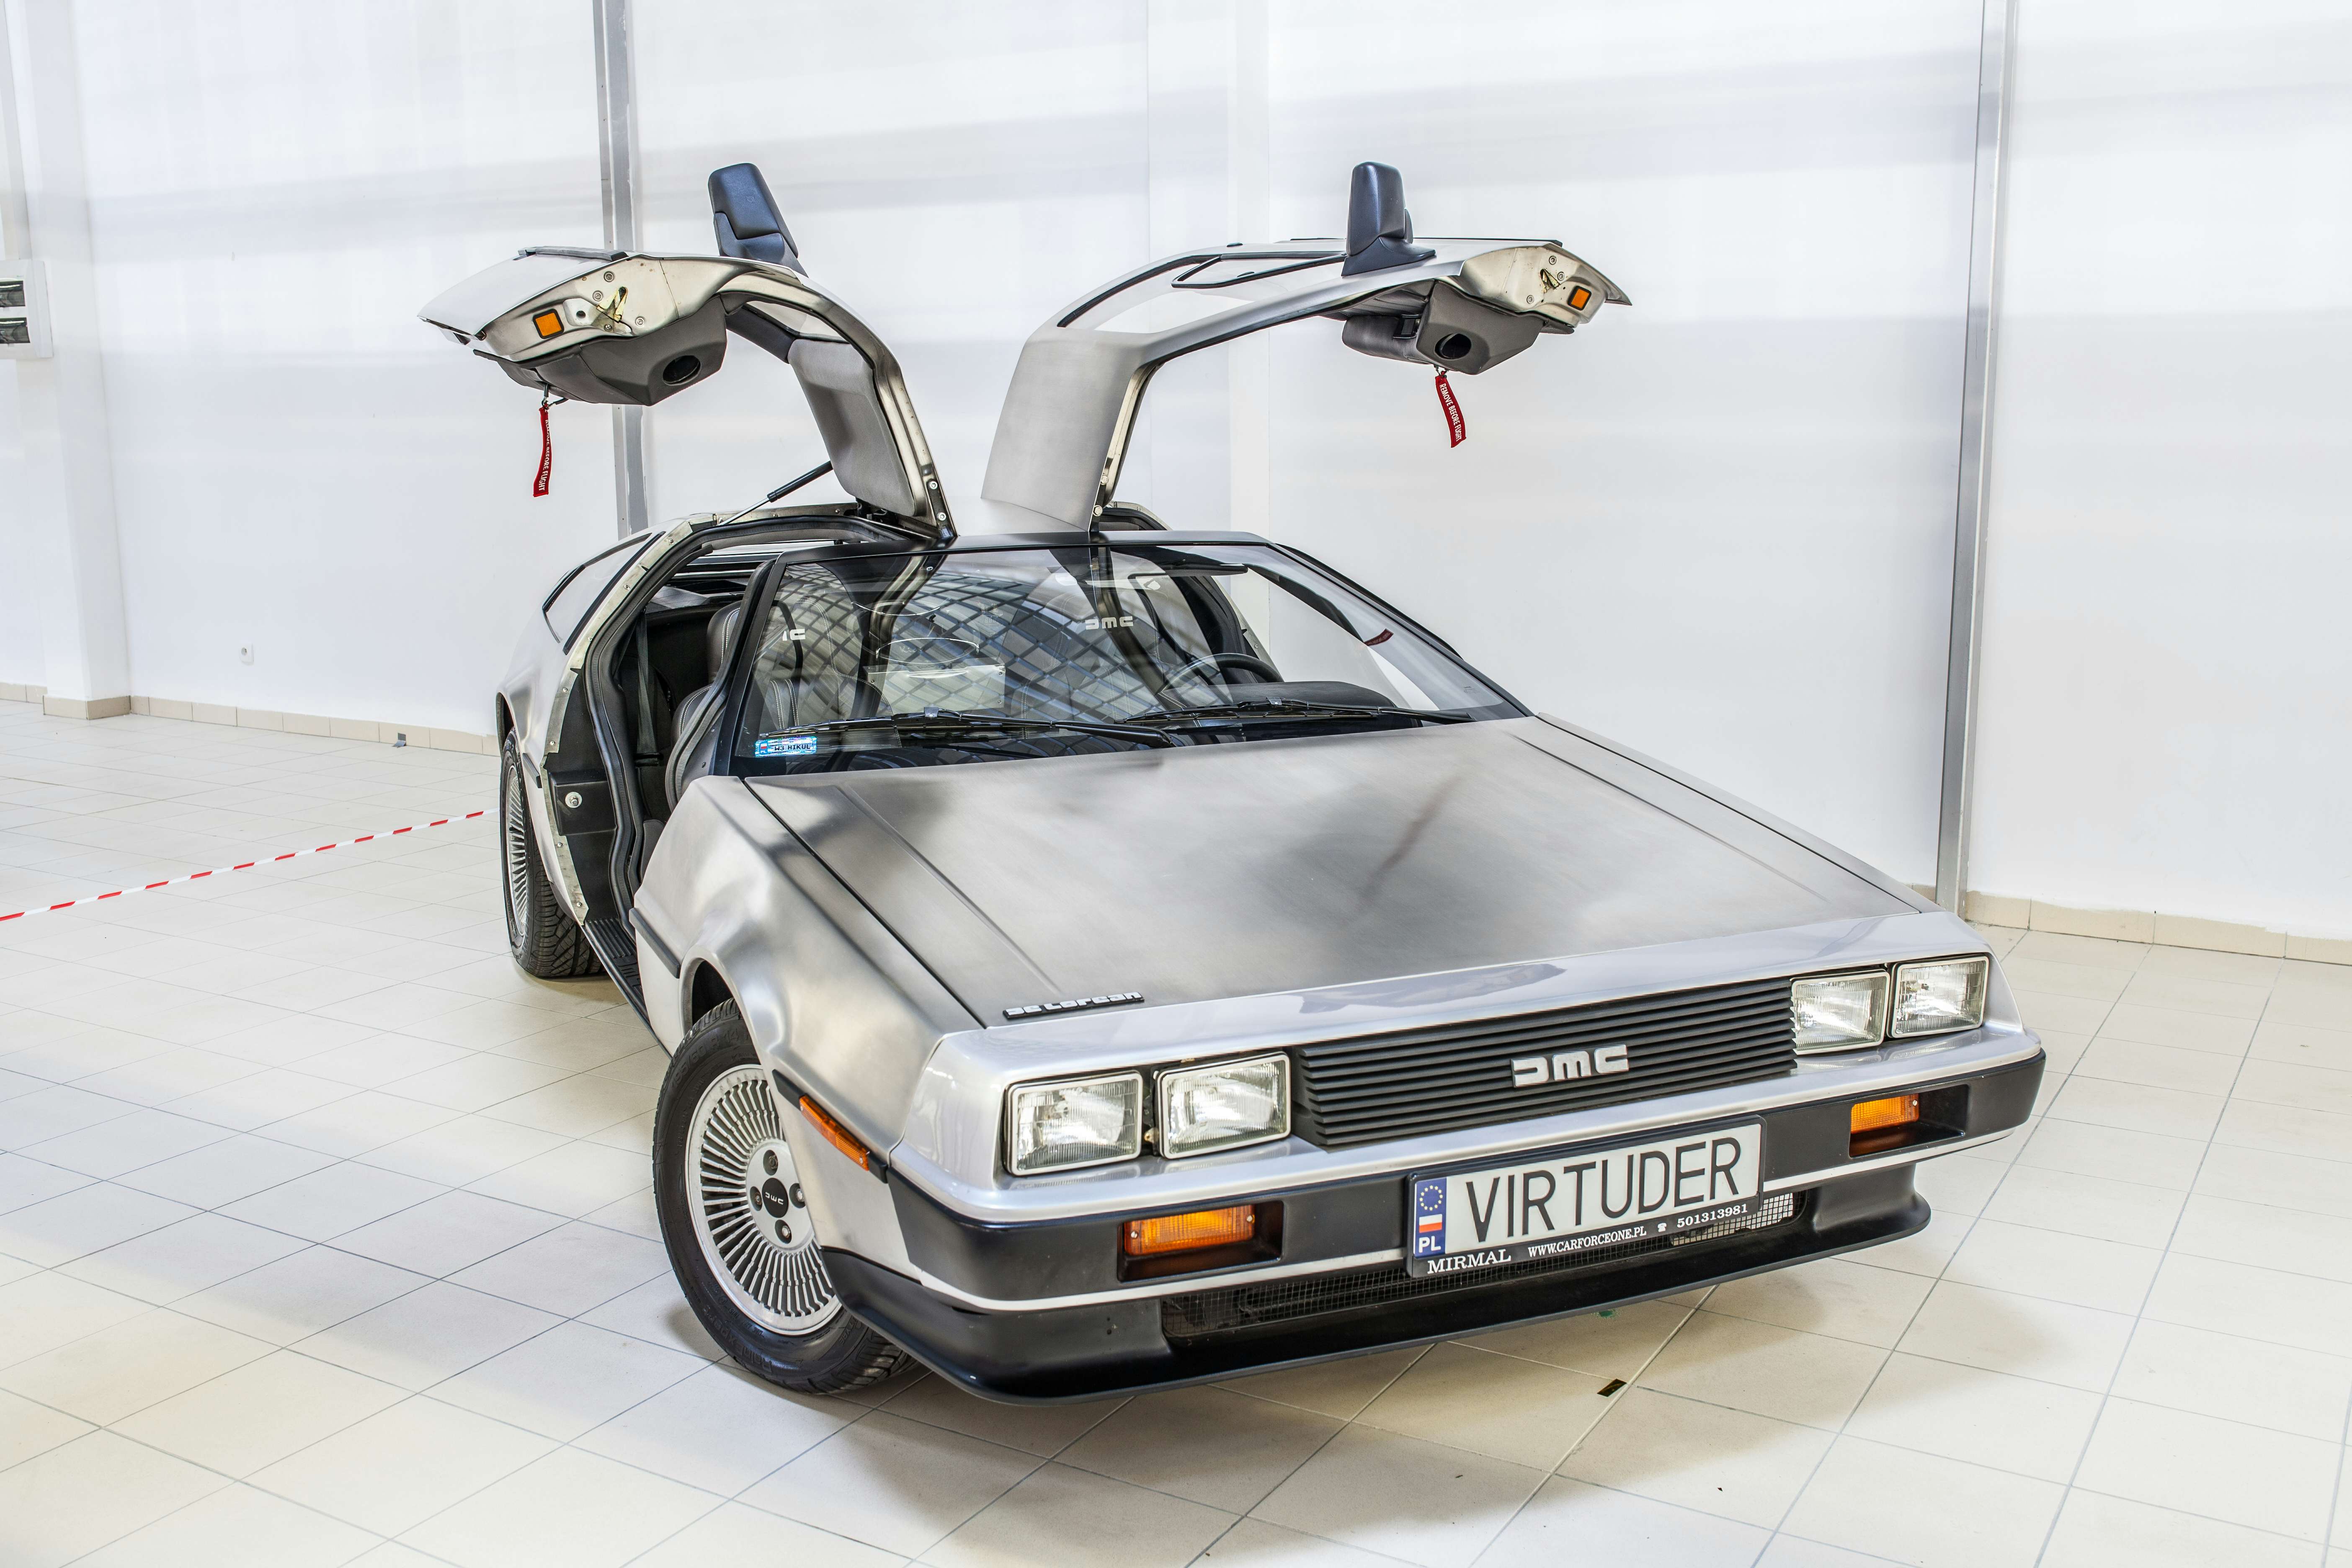 Back to the Future style DeLorean DMC-12 car - what will you be driving in the future?